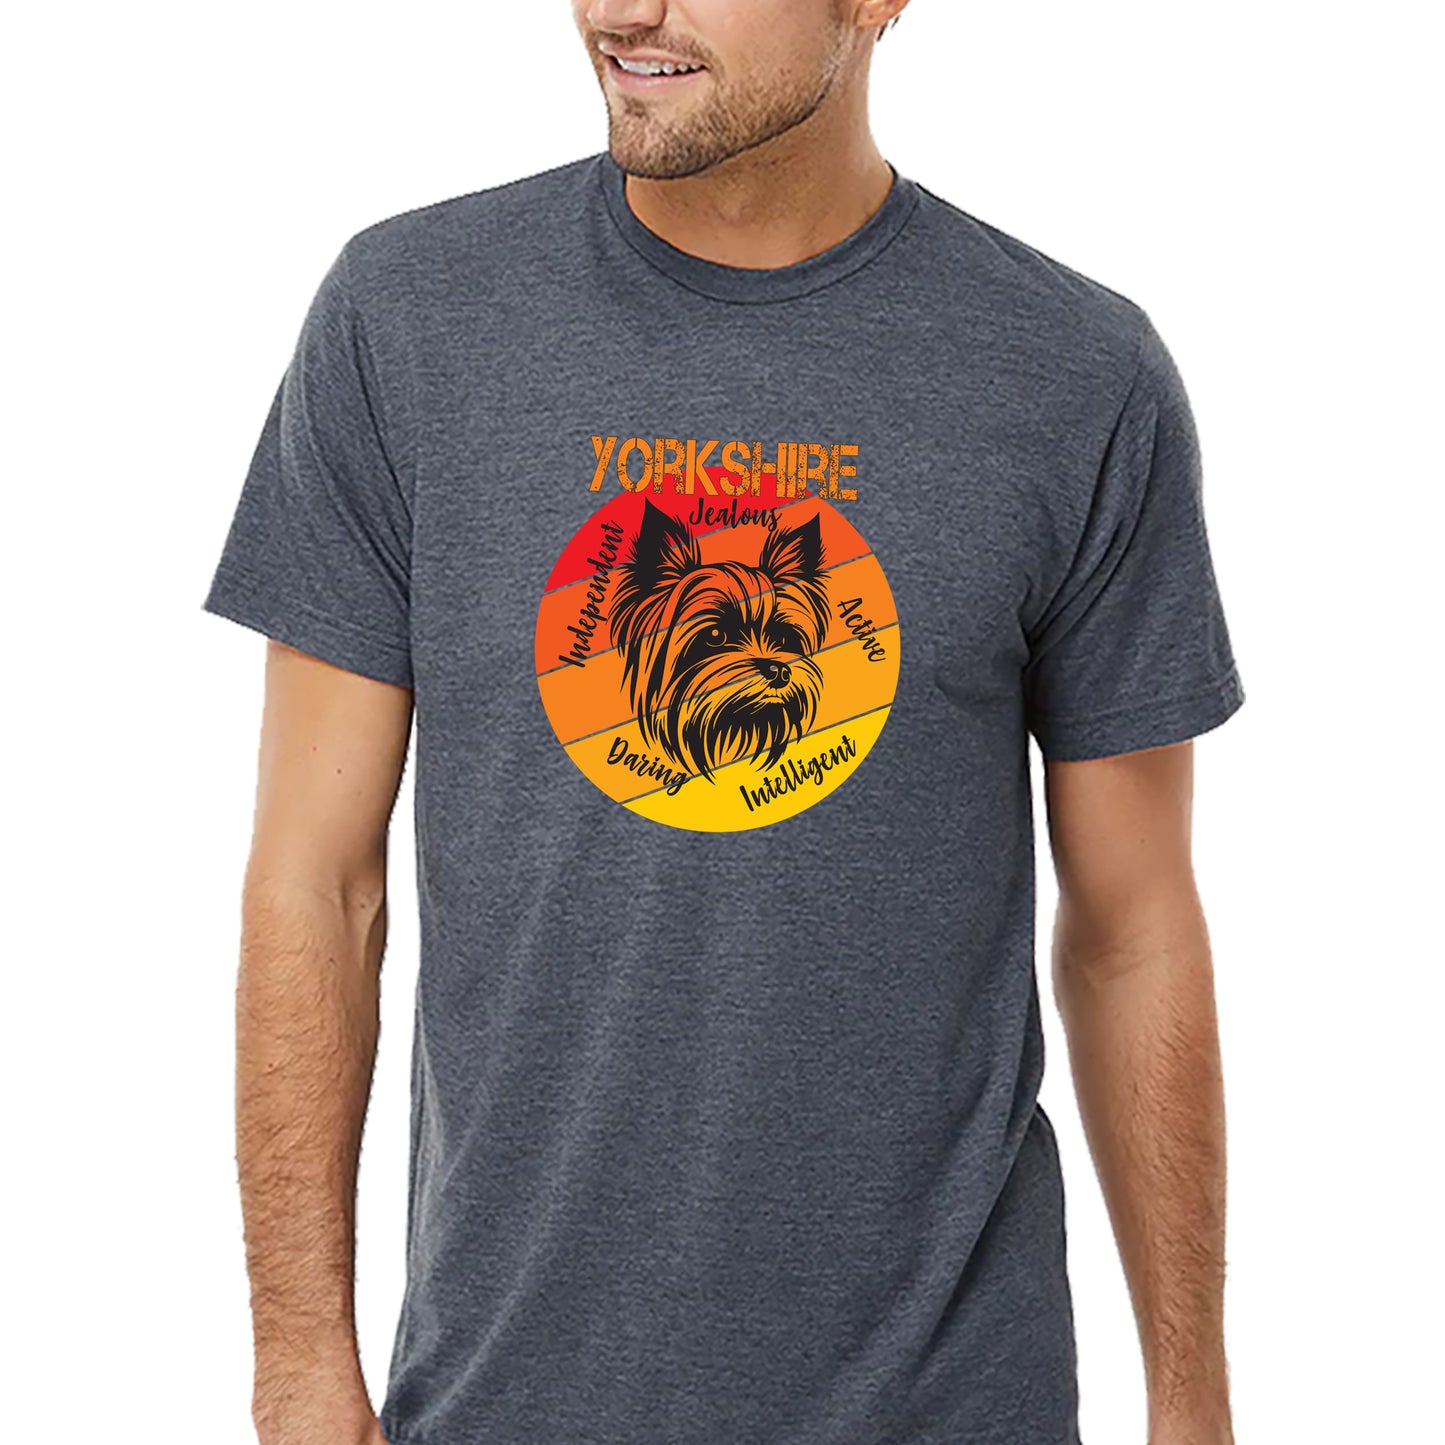 Character Of Yorkshire Terrier T-shirt